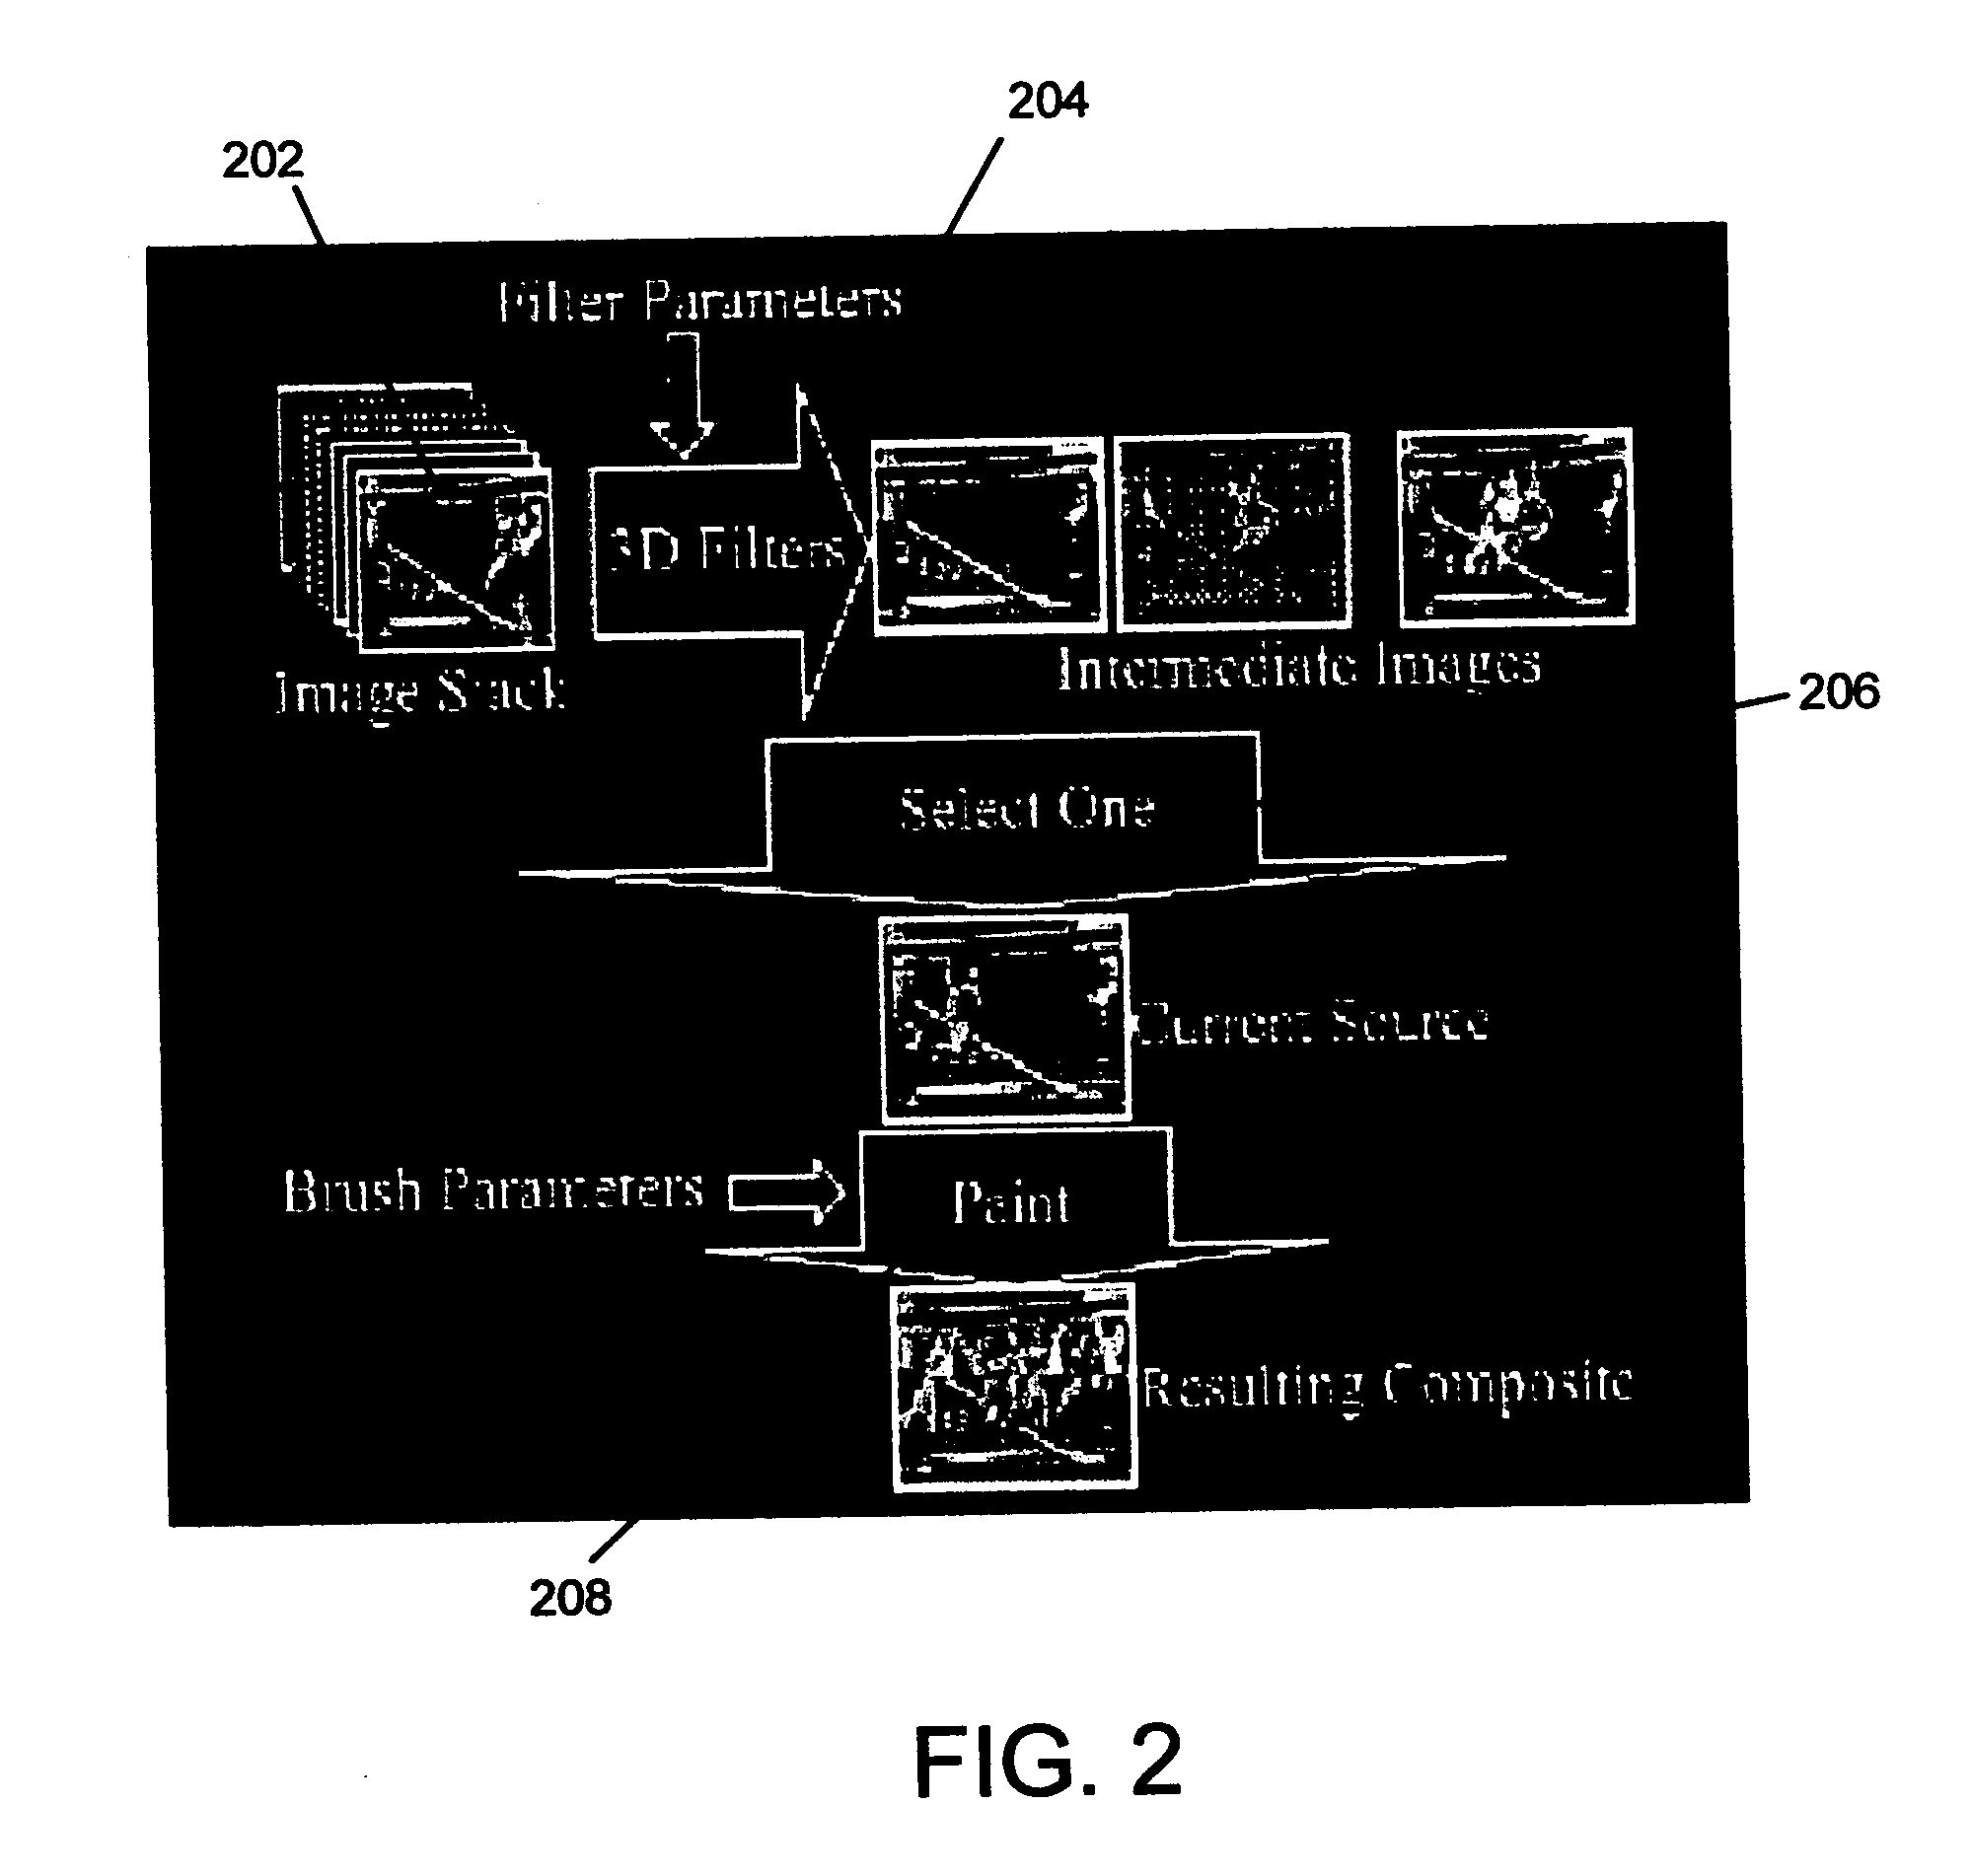 System and method for image editing using an image stack